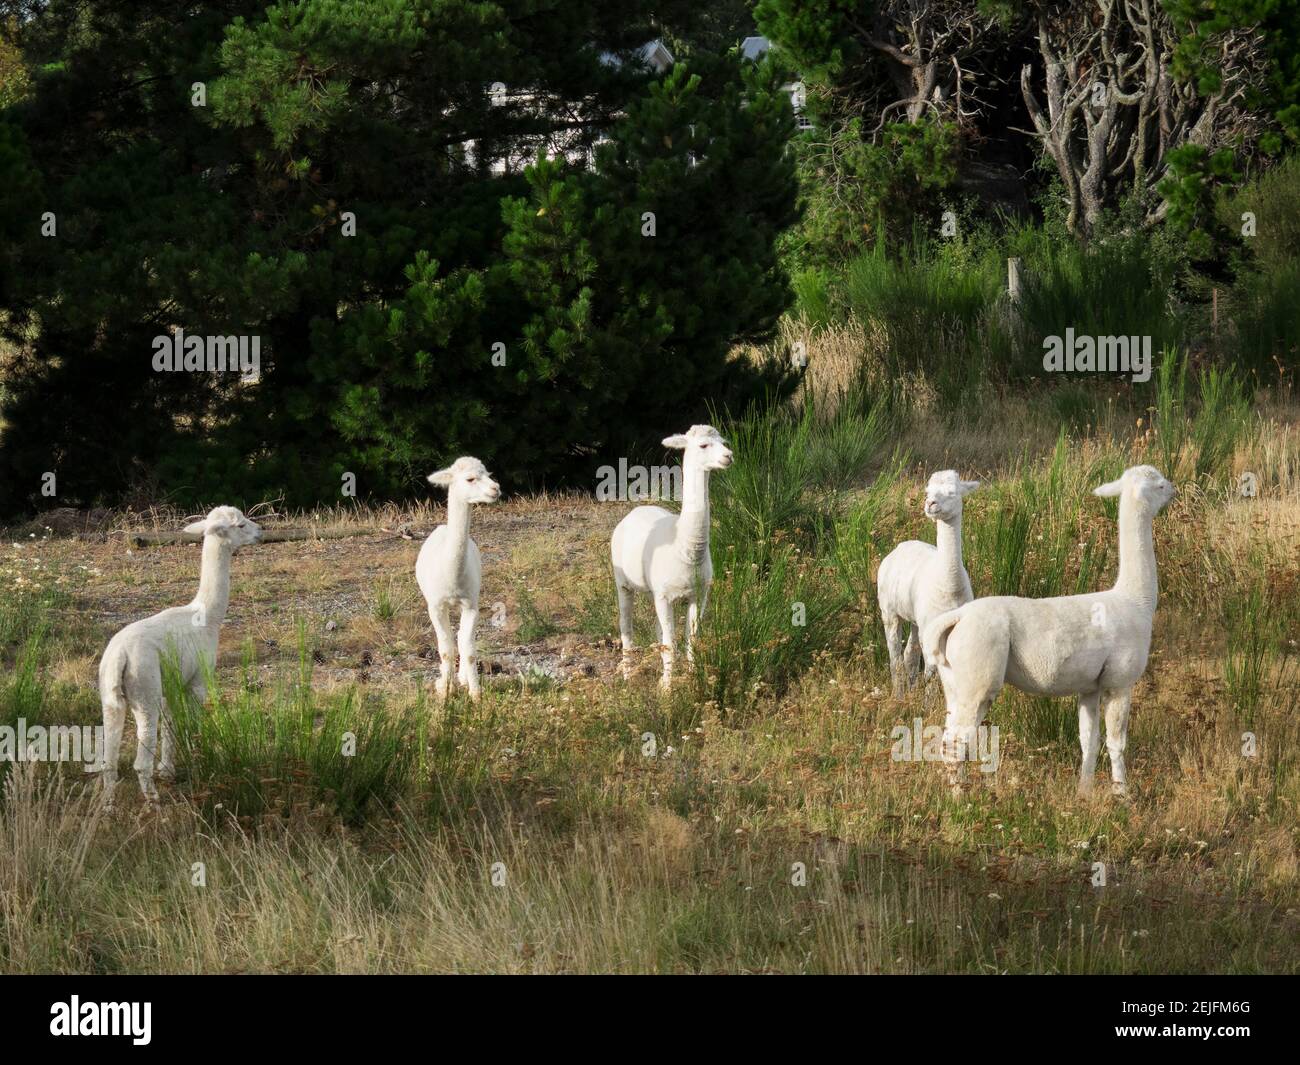 Llamas standing in a forest, Canterbury, South Island, New Zealand Stock Photo